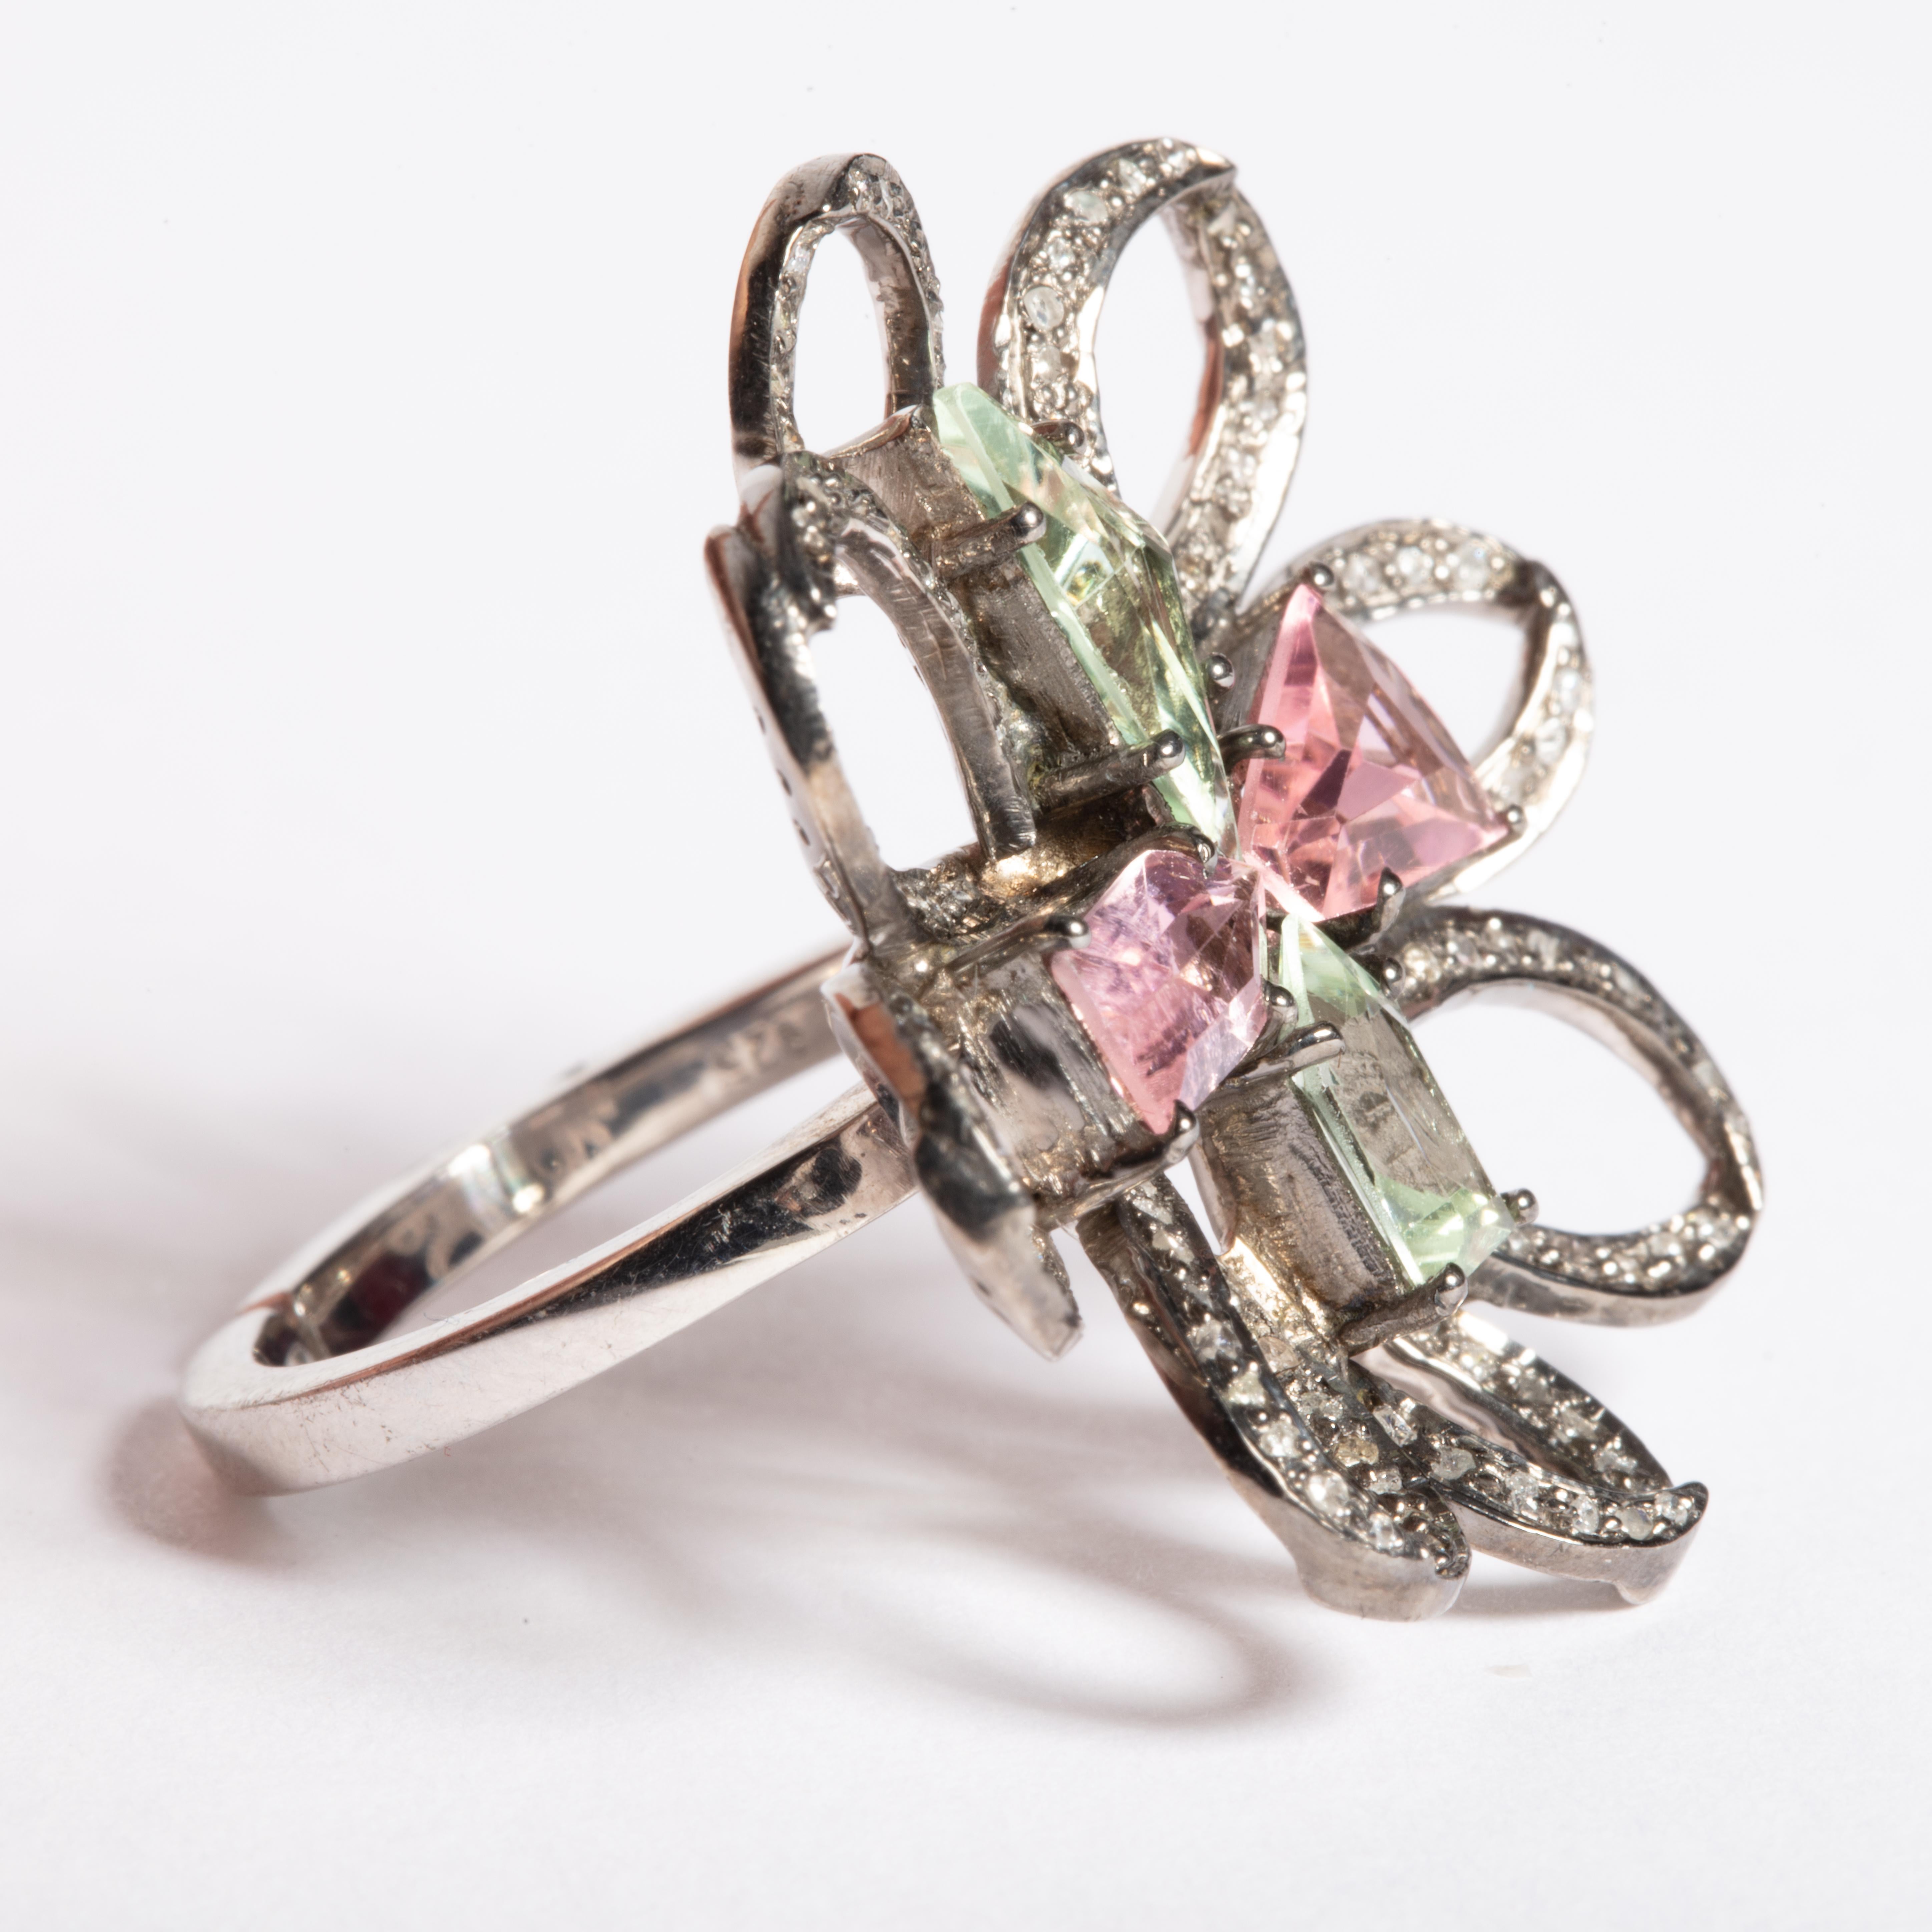 Unusually cut and faceted green aquamarine and morganite stones create the center of this flower ring.  The petals are brilliant cut and pave' set diamonds set in an oxidized sterling silver.  Ring size is 7.25.